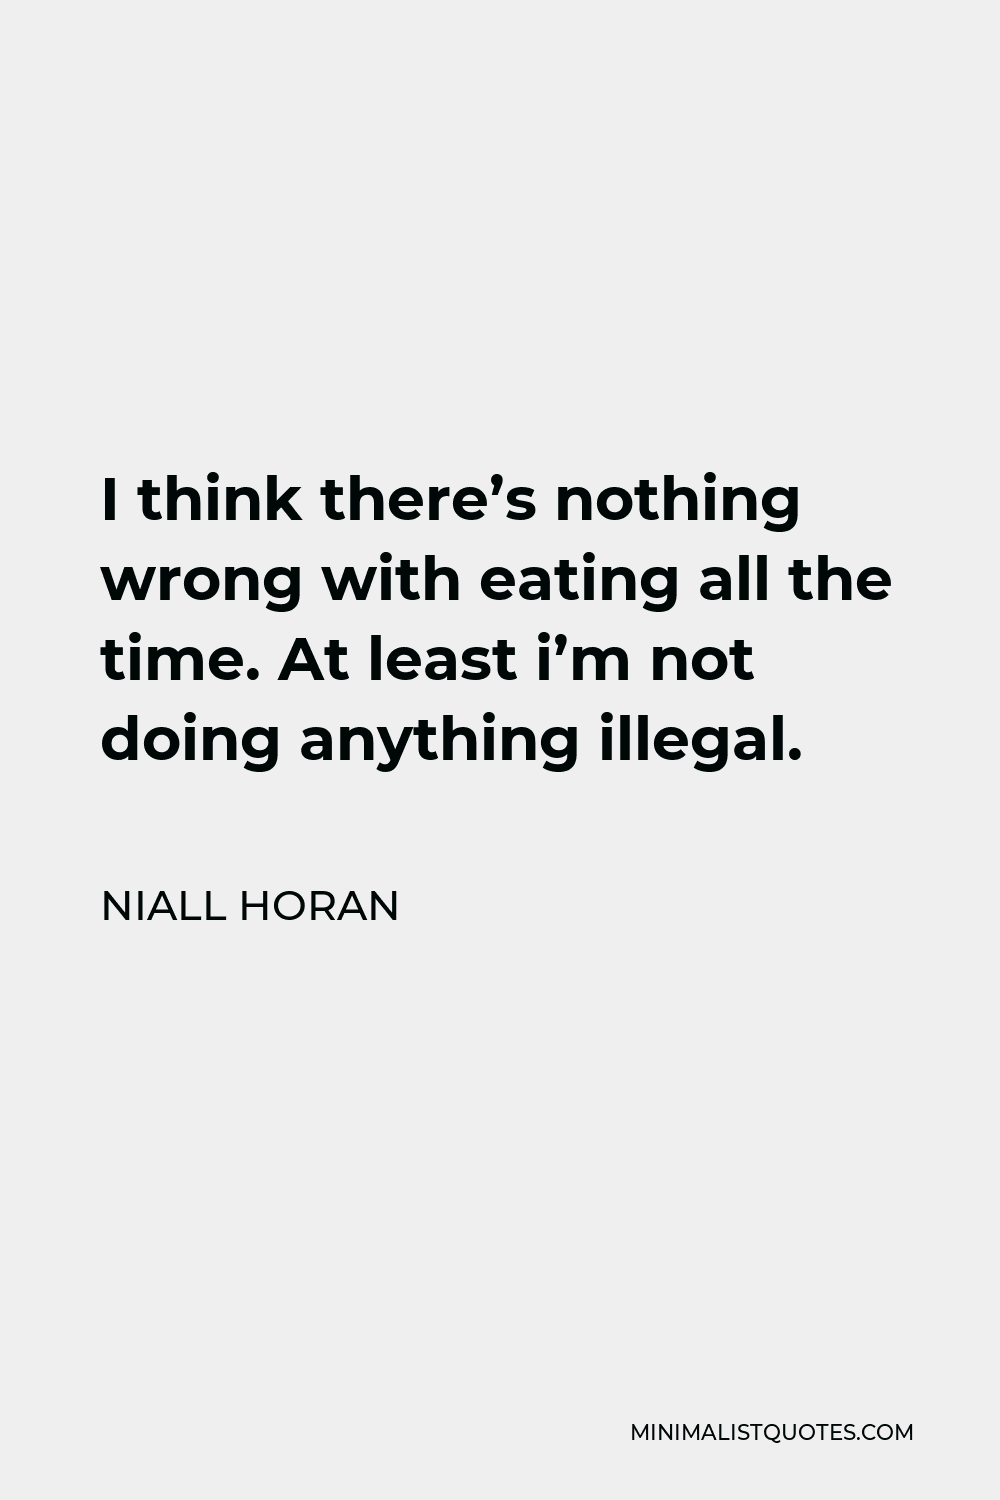 Niall Horan Quote - I think there’s nothing wrong with eating all the time. At least i’m not doing anything illegal.